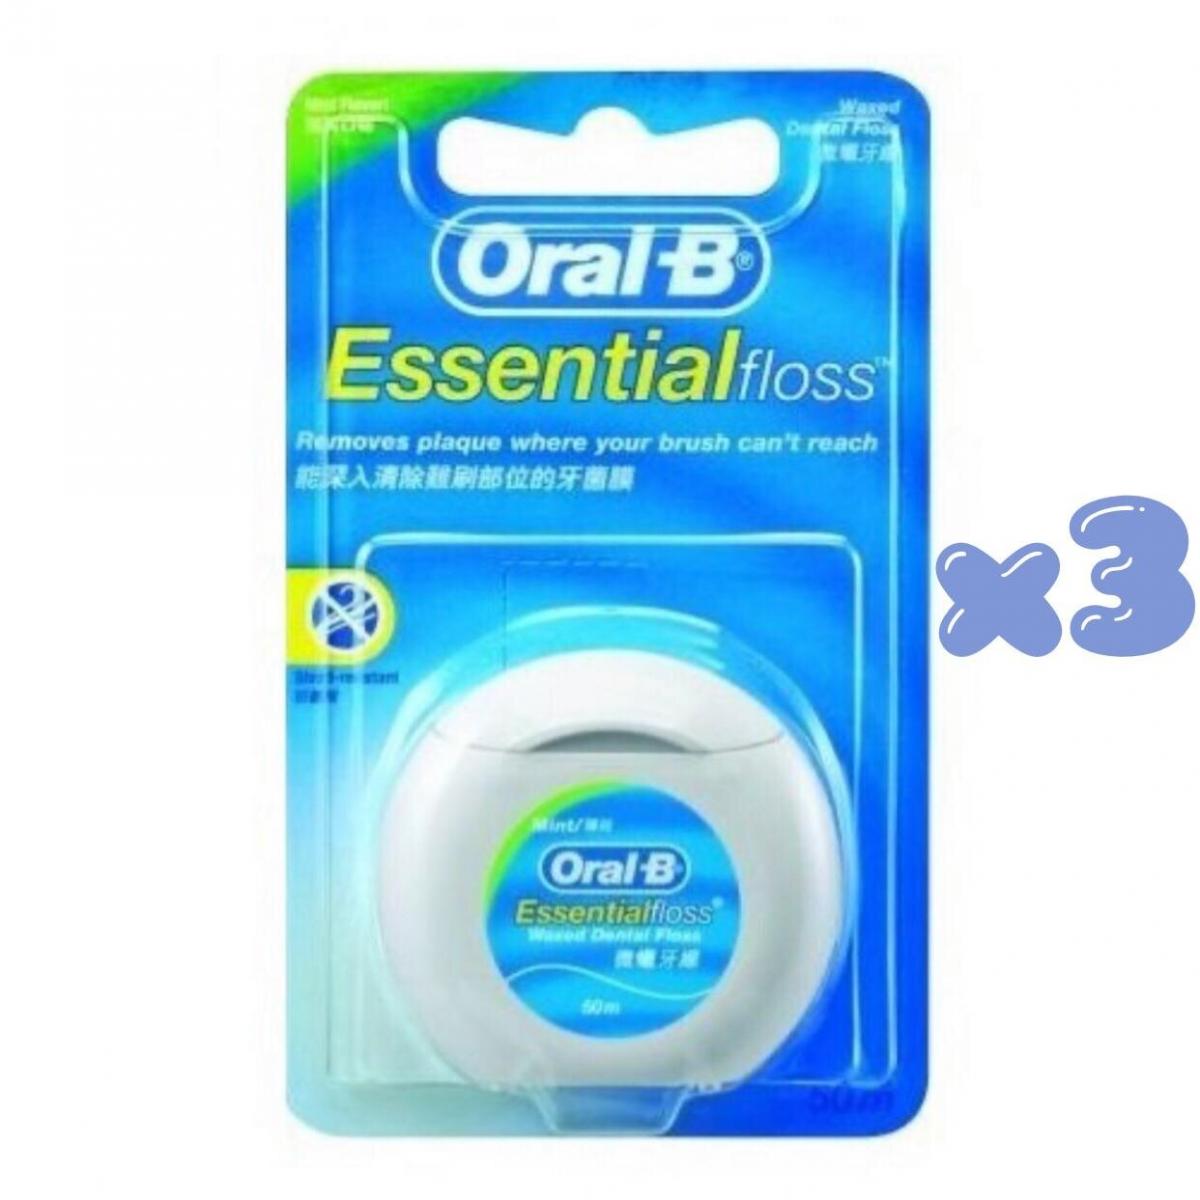 Moden flydende Glat Oral-B | [3 Packs] x (Mint) Essential Floss Waxed Dental Floss 50m  [Parallel Import] *Random new/old packing & color | HKTVmall The Largest HK  Shopping Platform